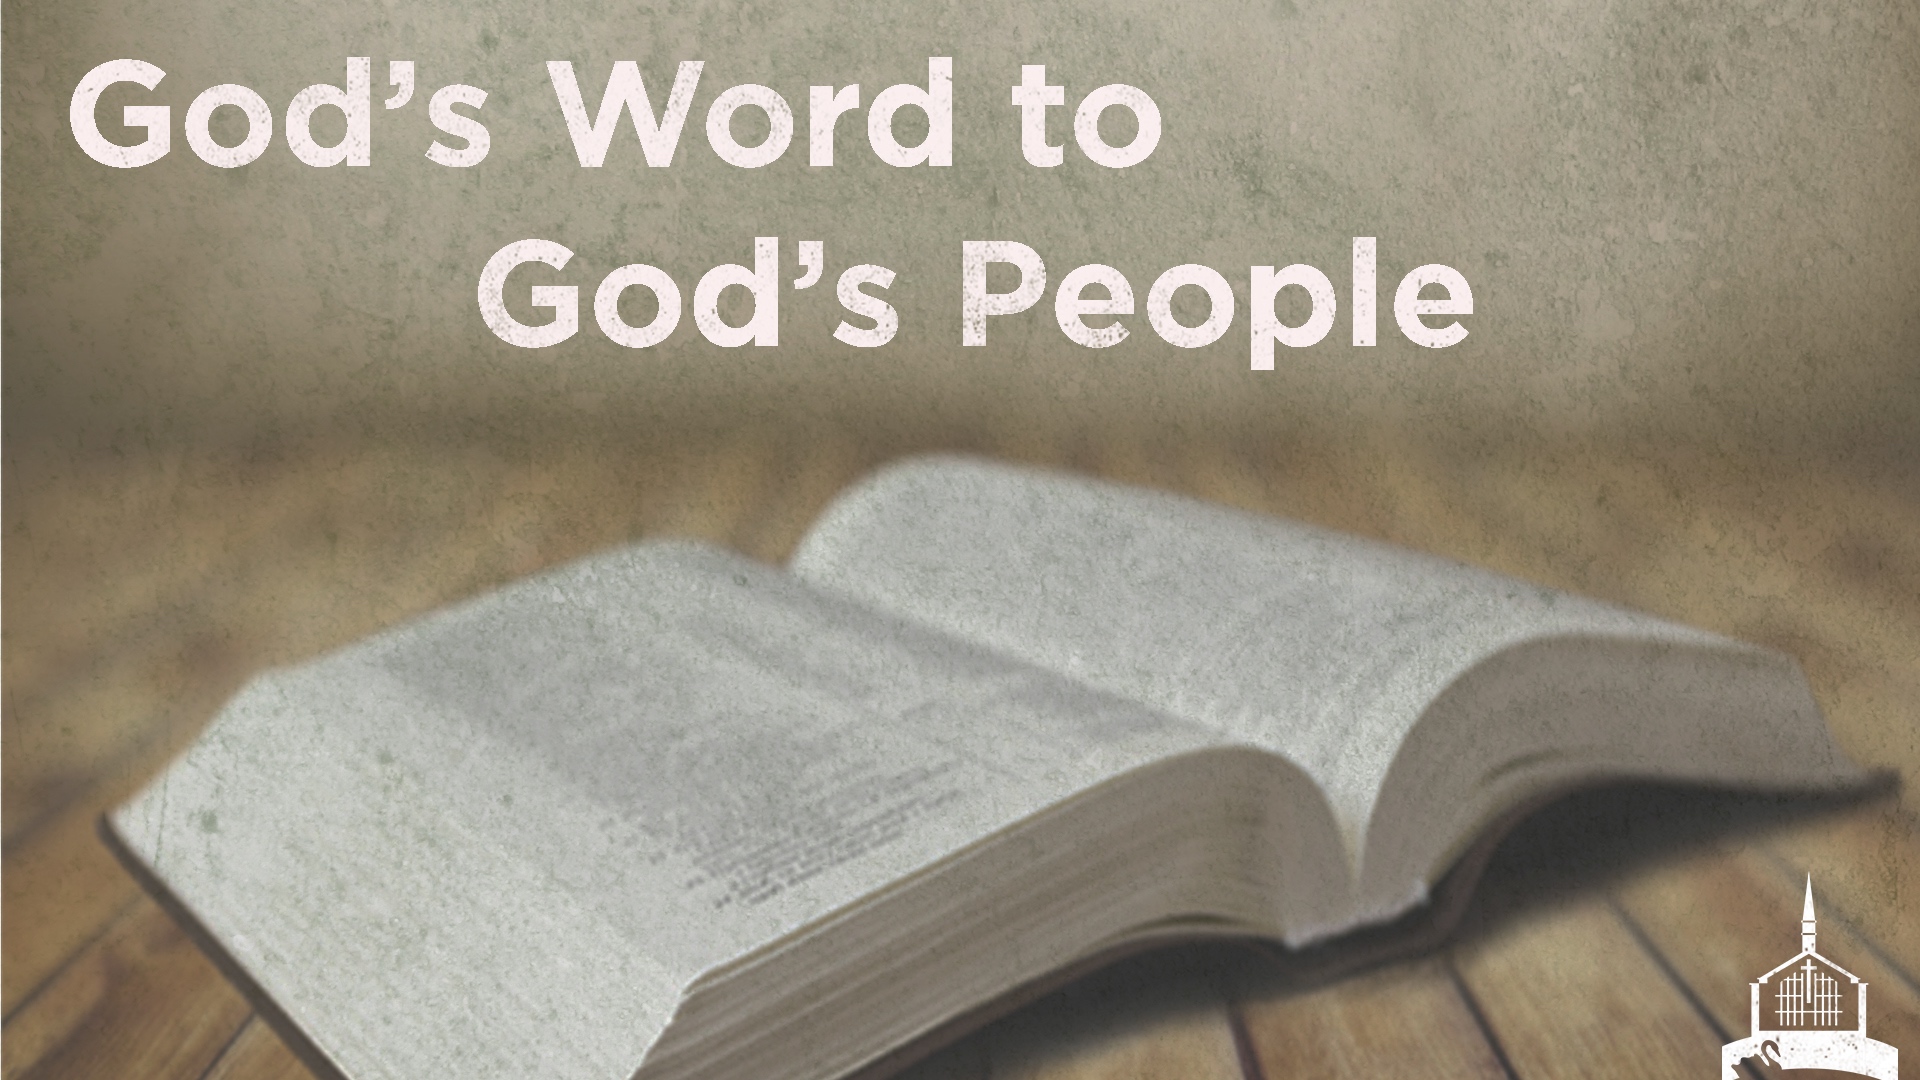 God's Word to Believers in a Culture of Tolerance